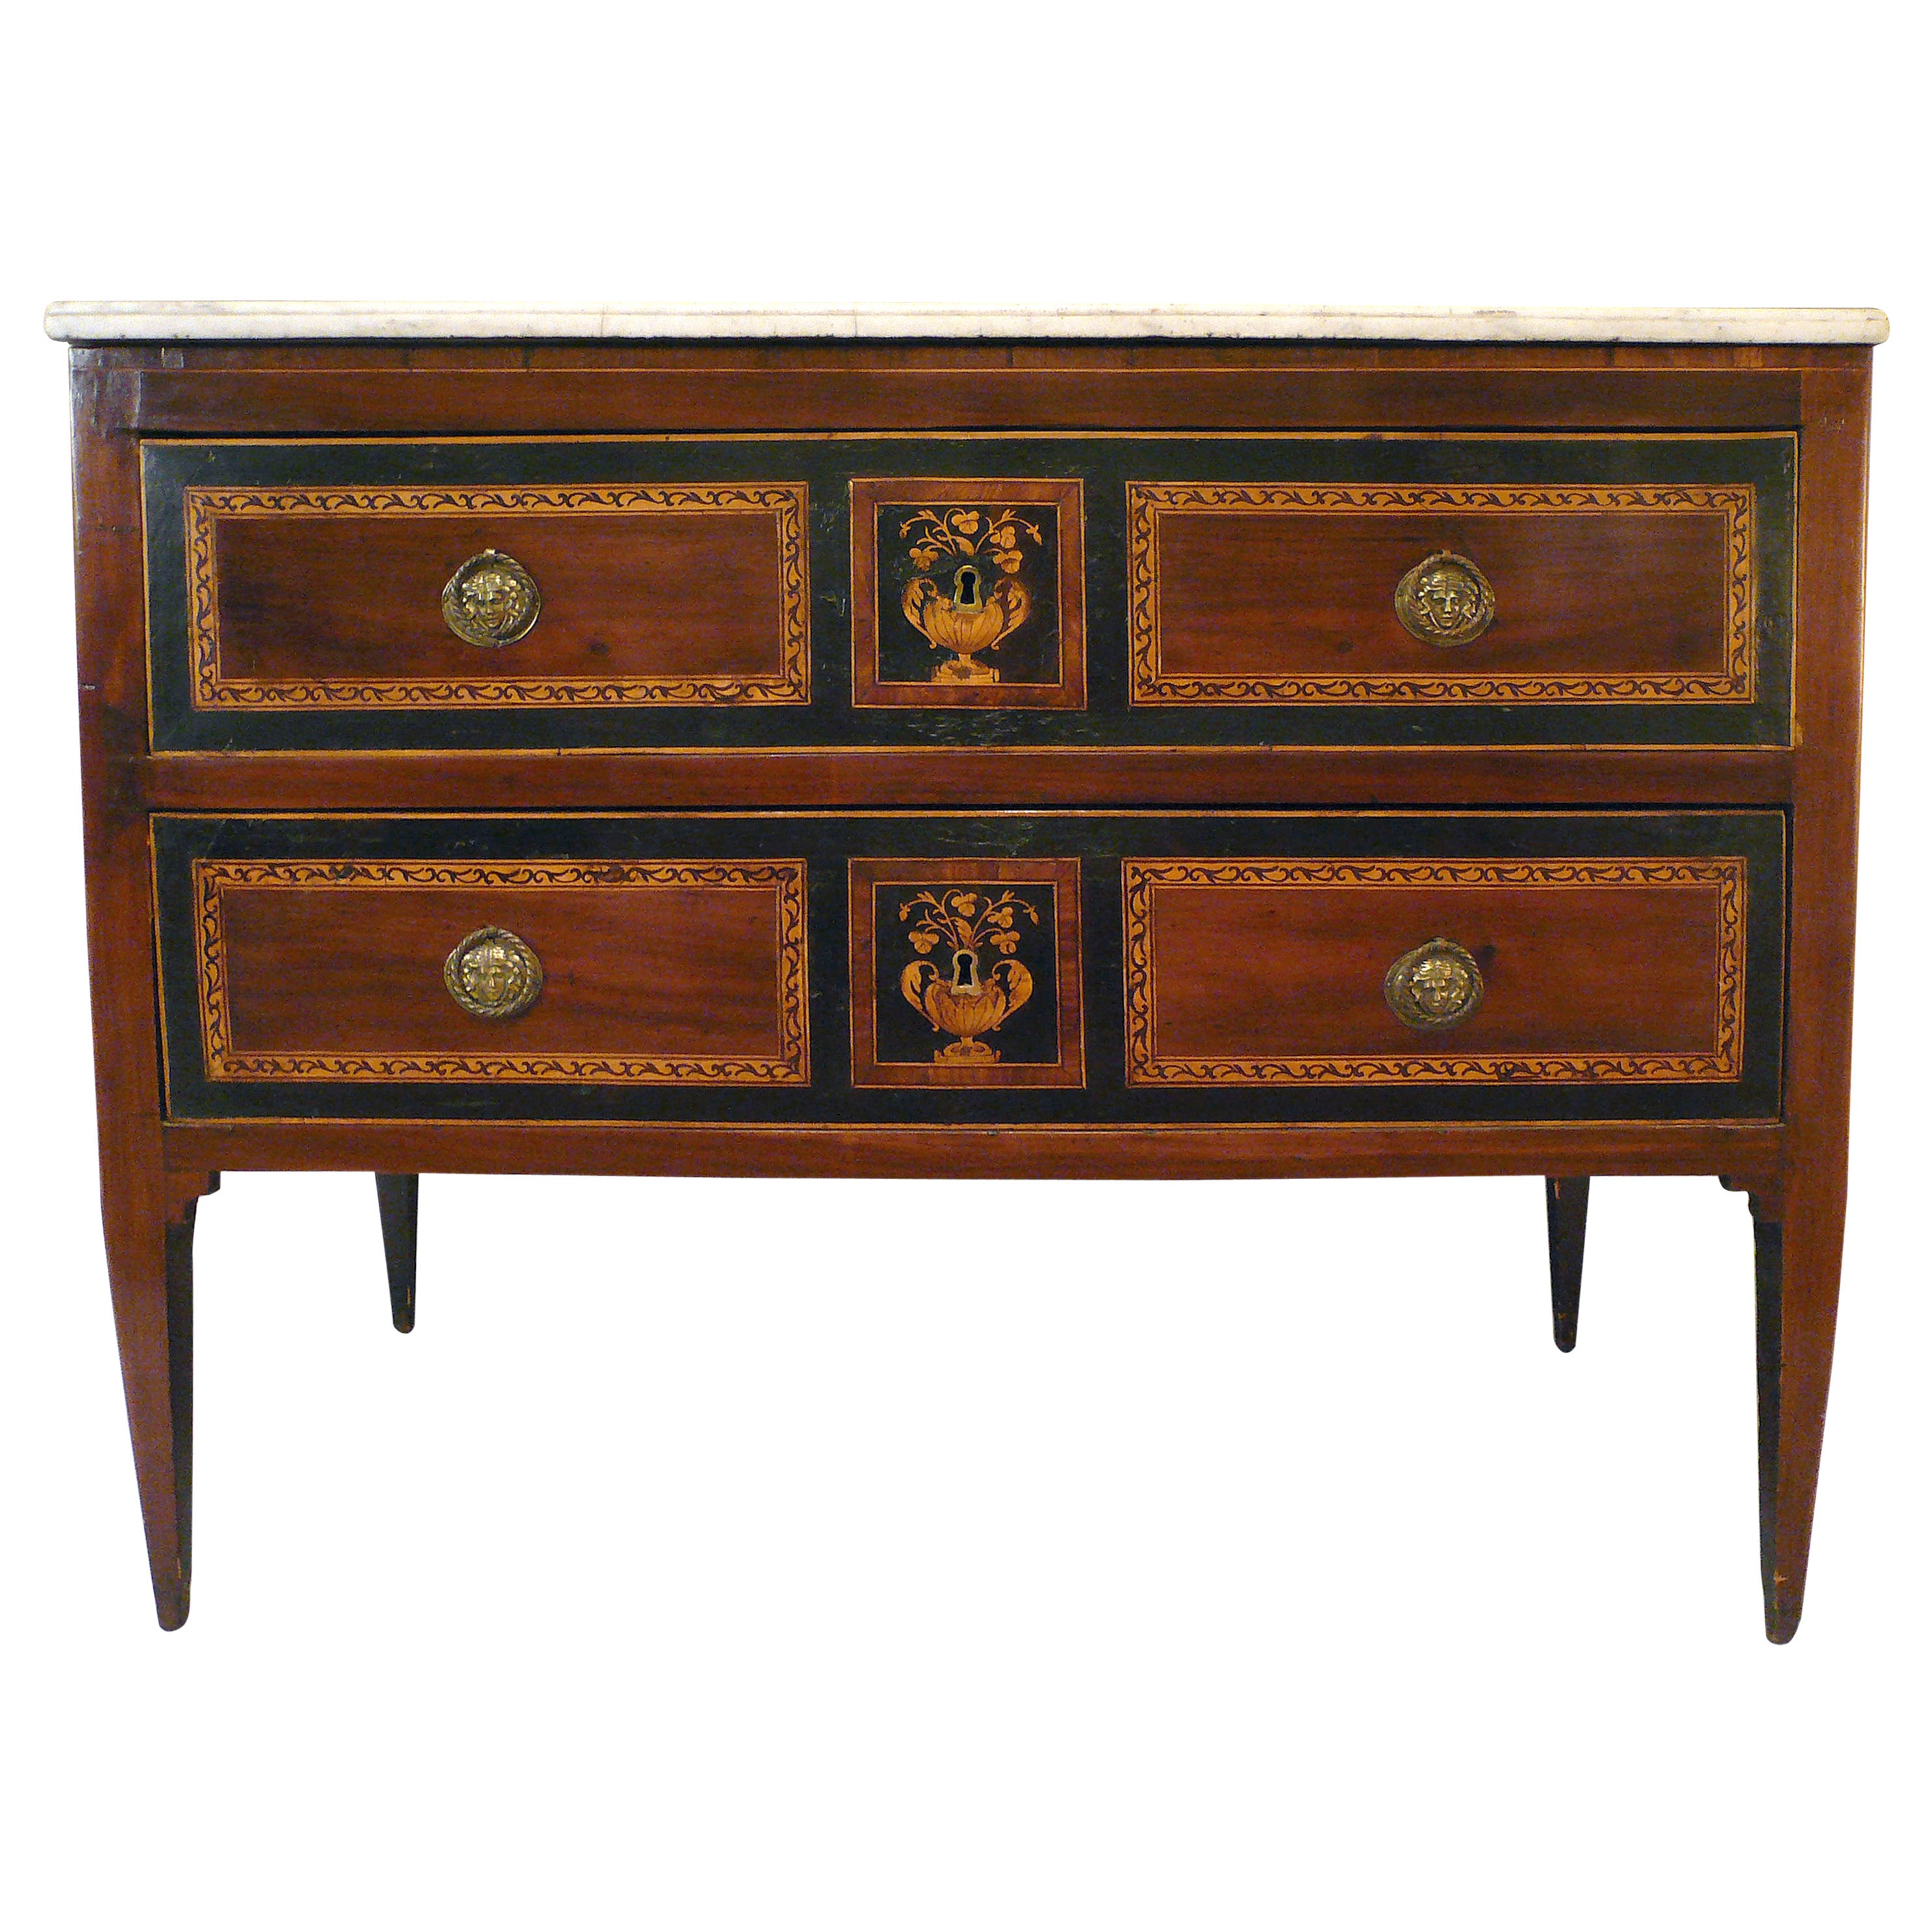 Northern Italian Neoclassical Marble-Top Commode